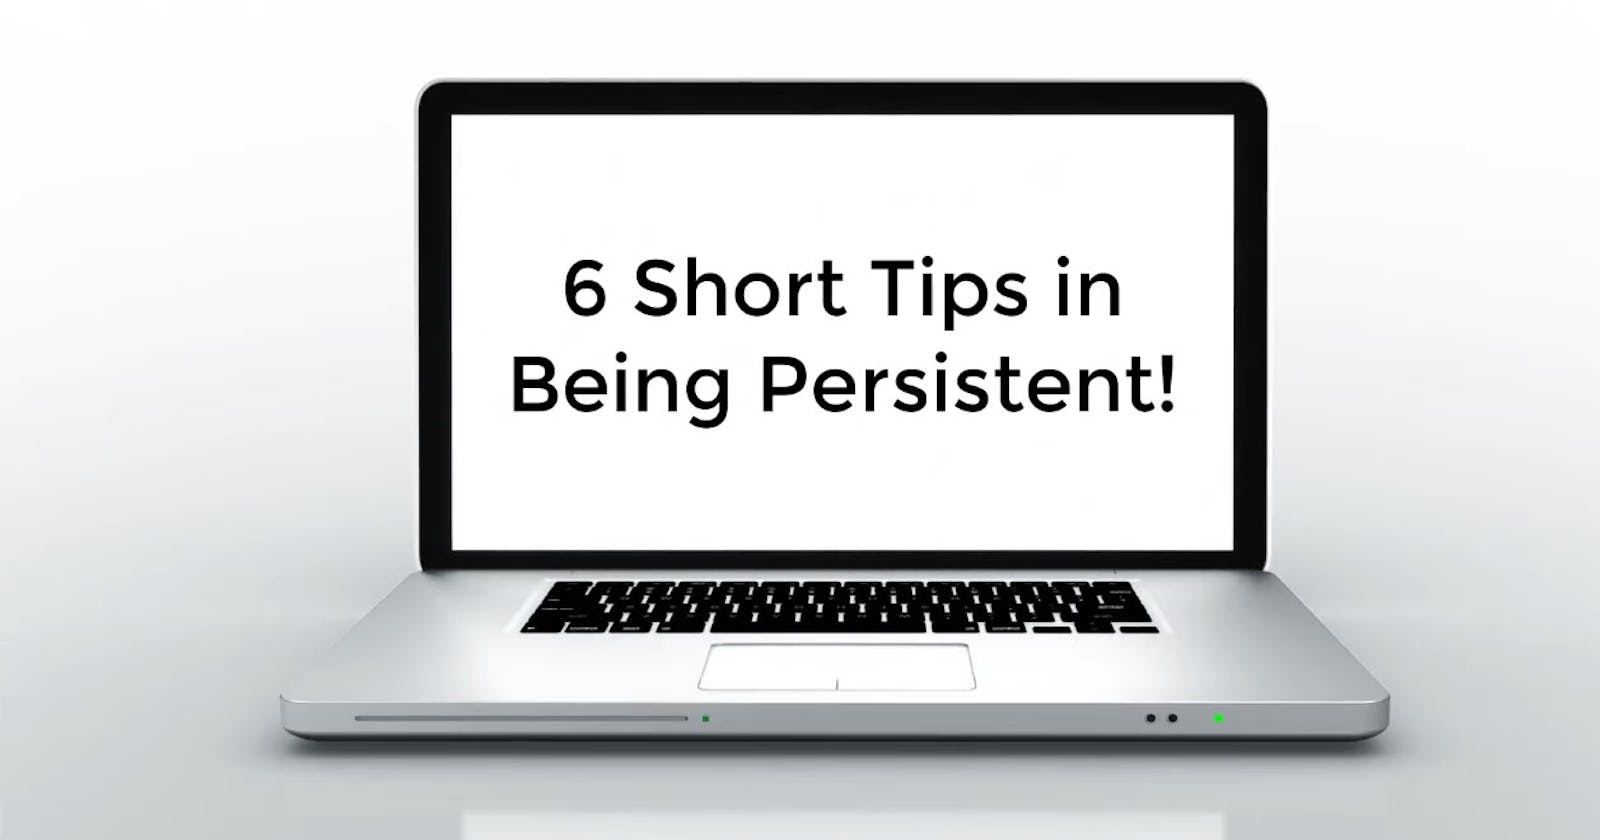 6 Short Tips in Being Persistent!⠀